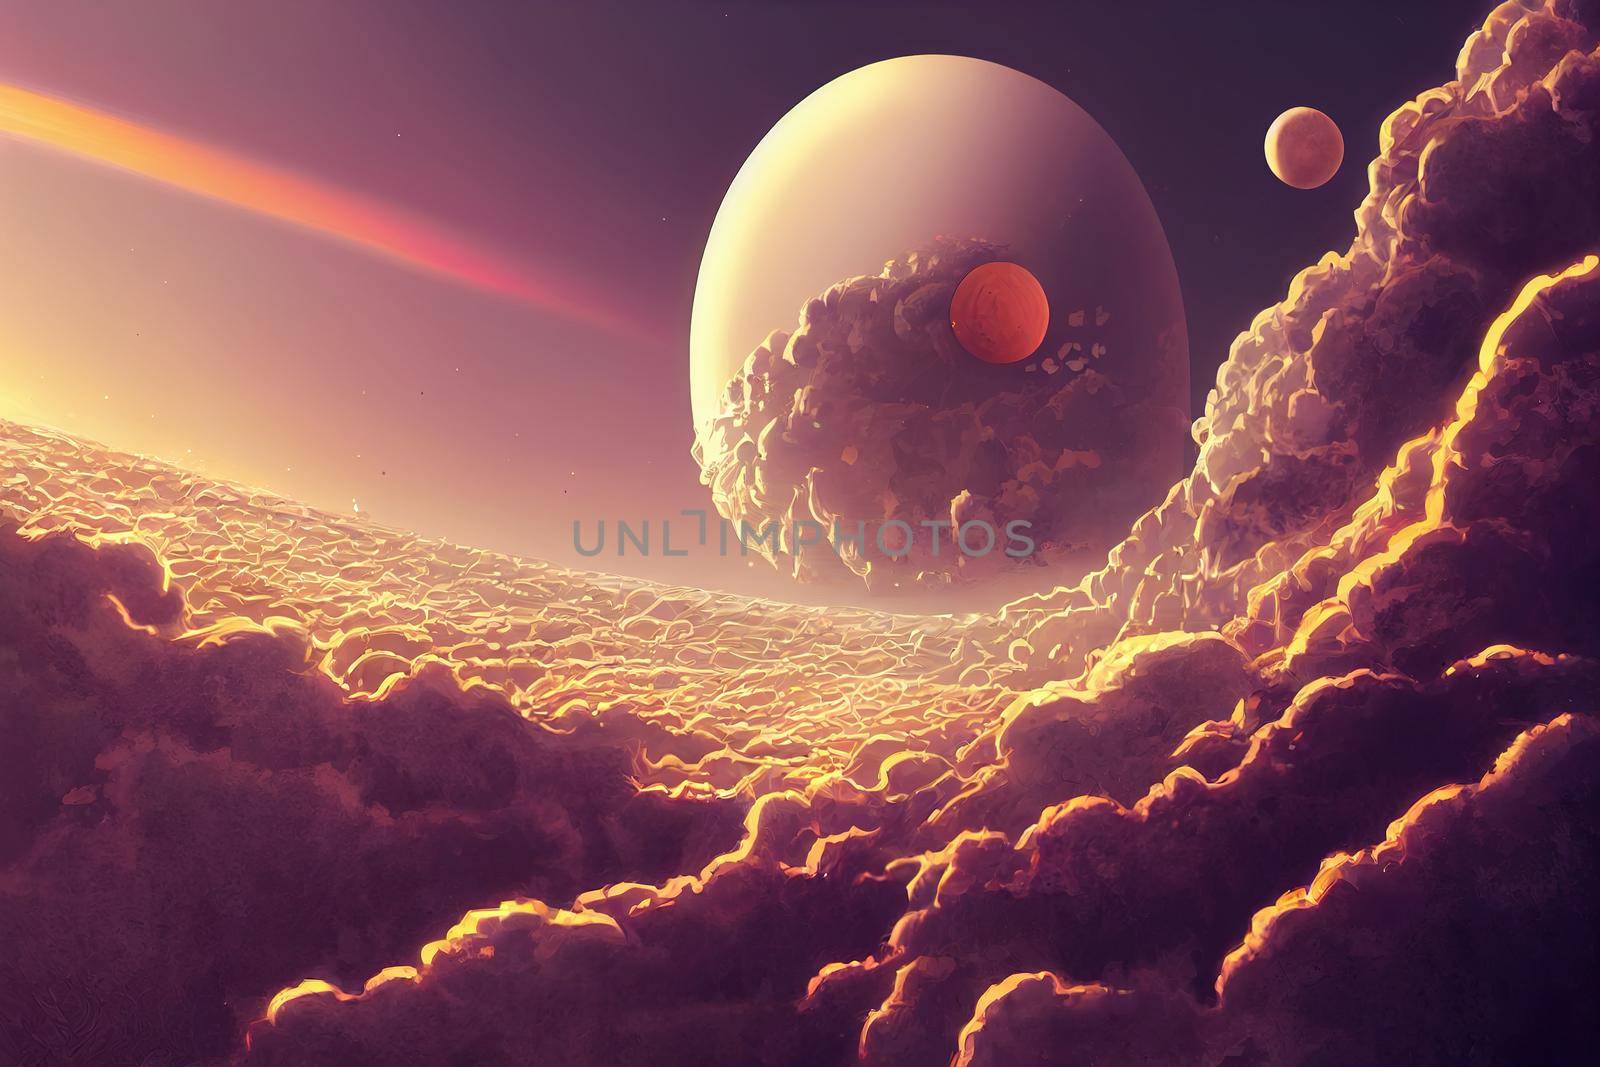 Venus in abstract futuristic background with anime style clouds